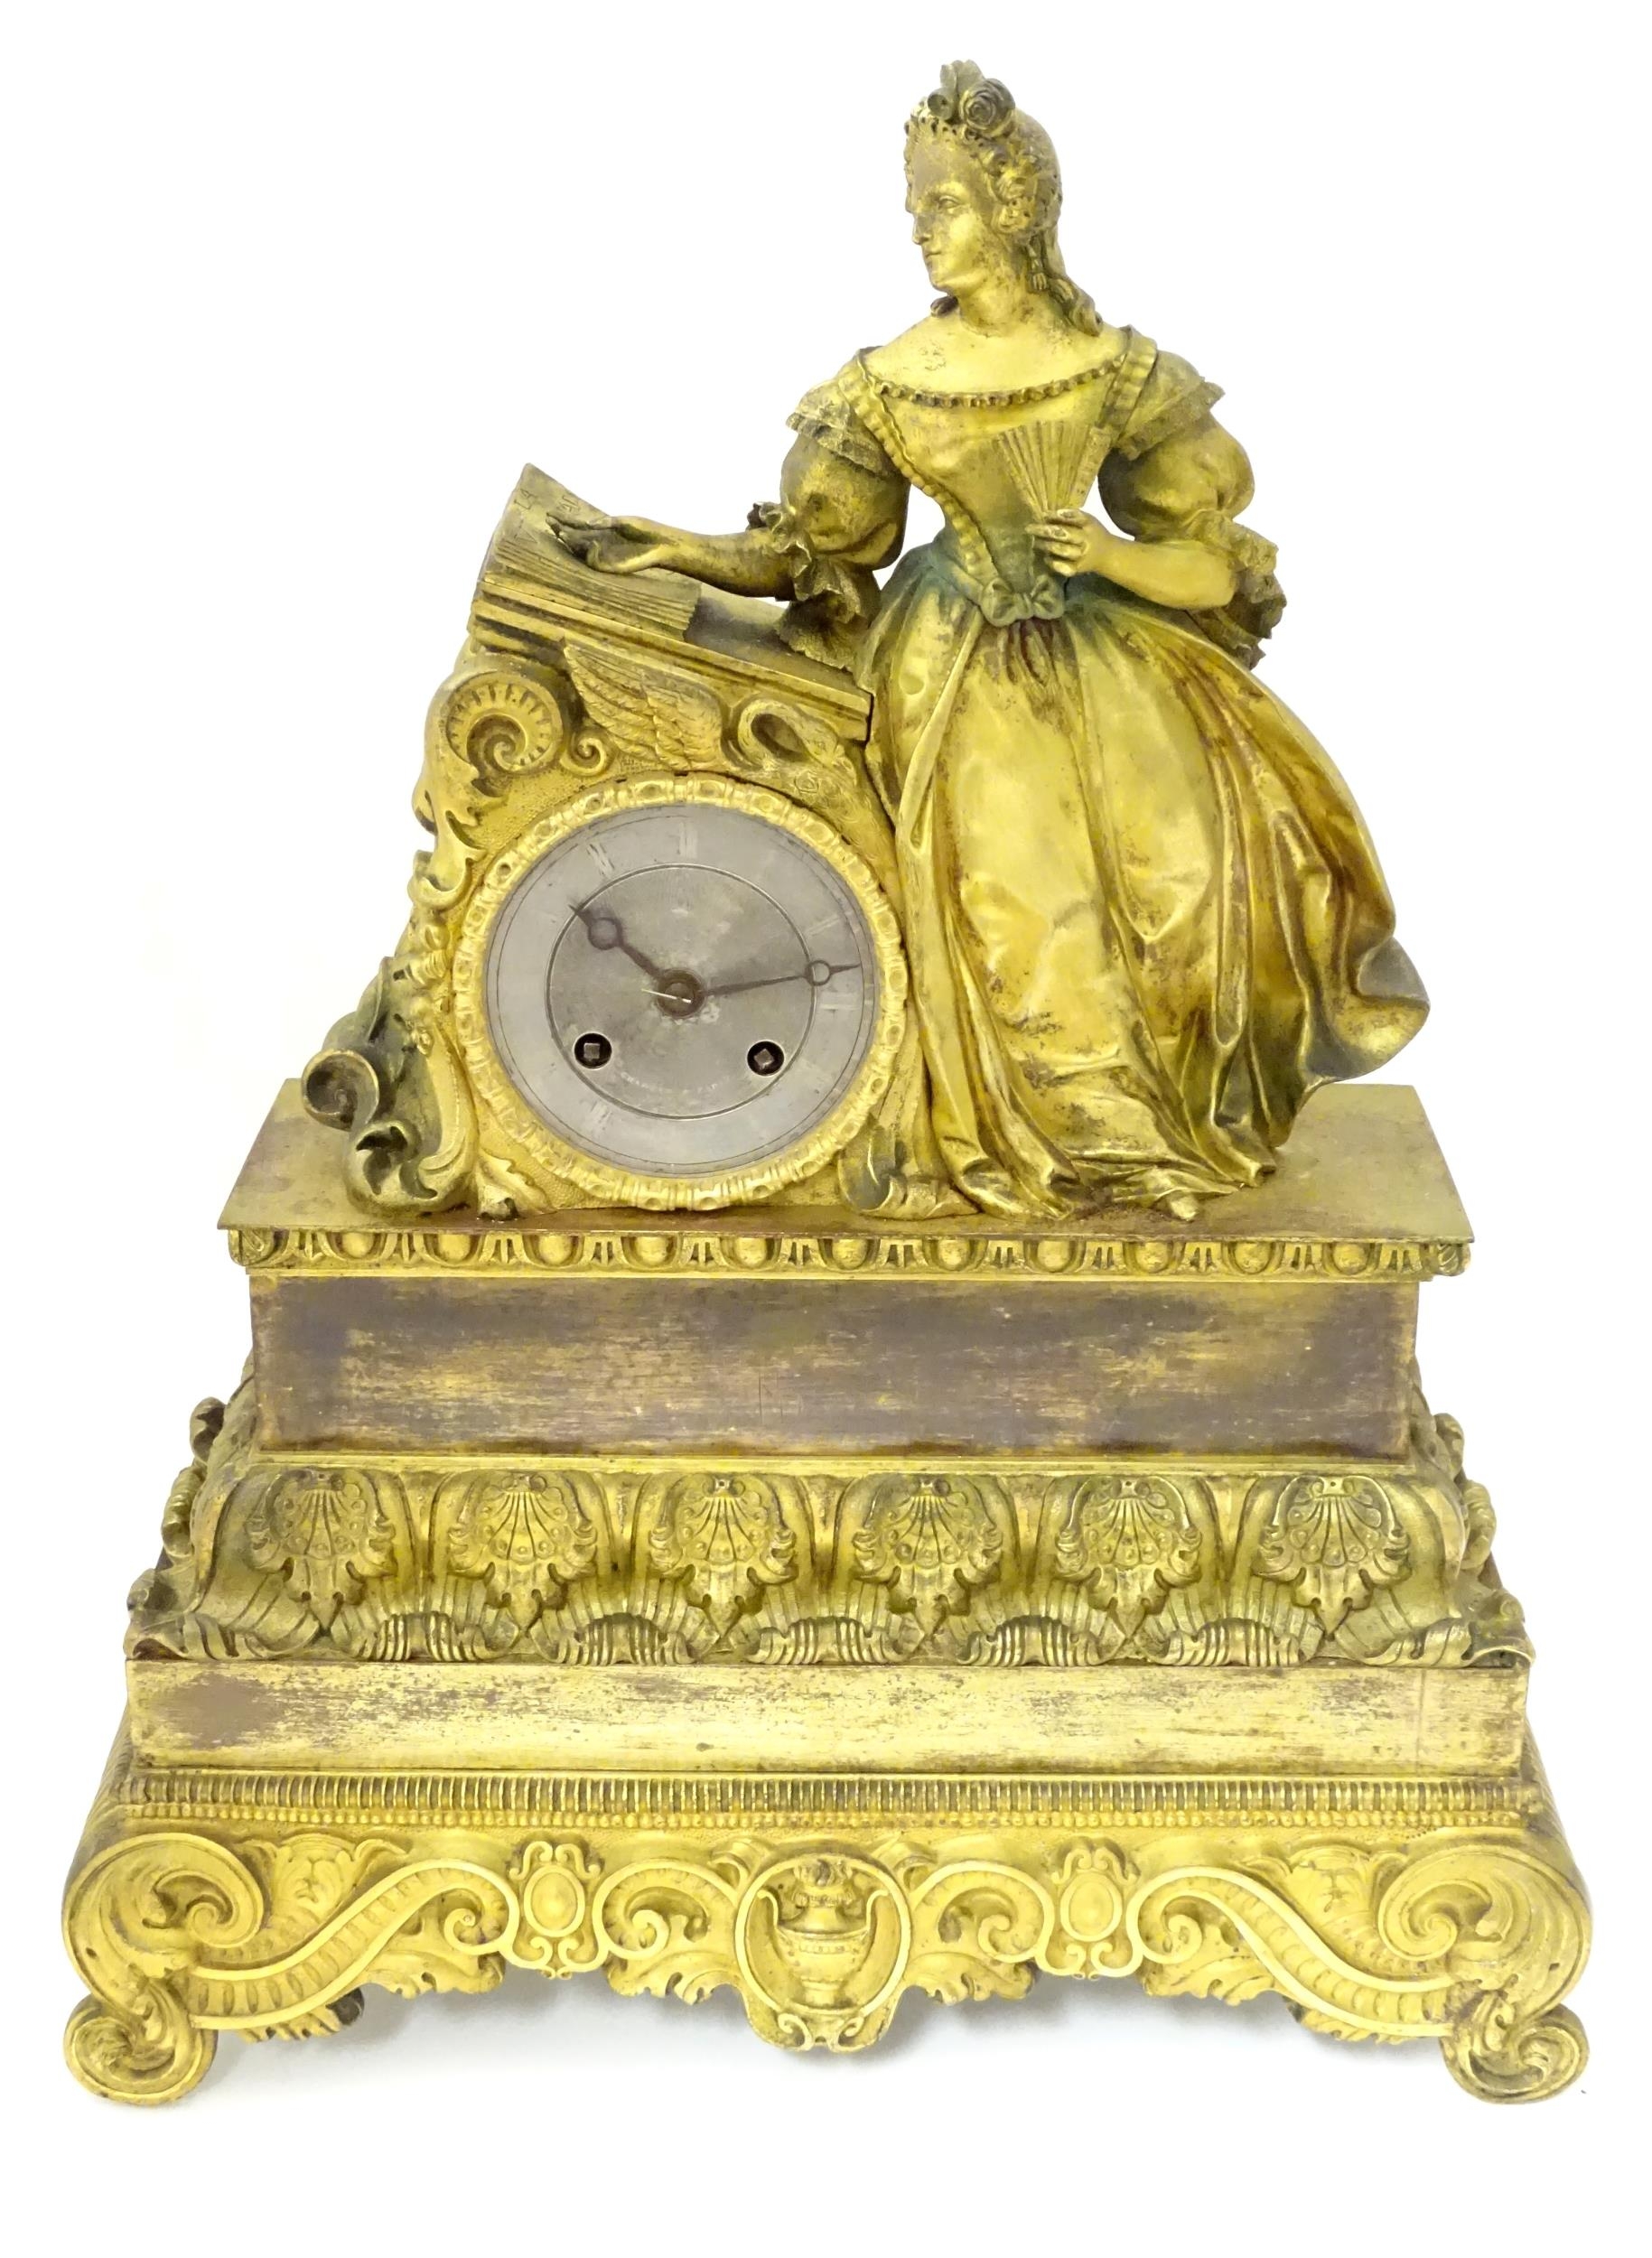 A 19thc French mantel clock with figural decoration. The silvered dial with moon hands, the 8 day